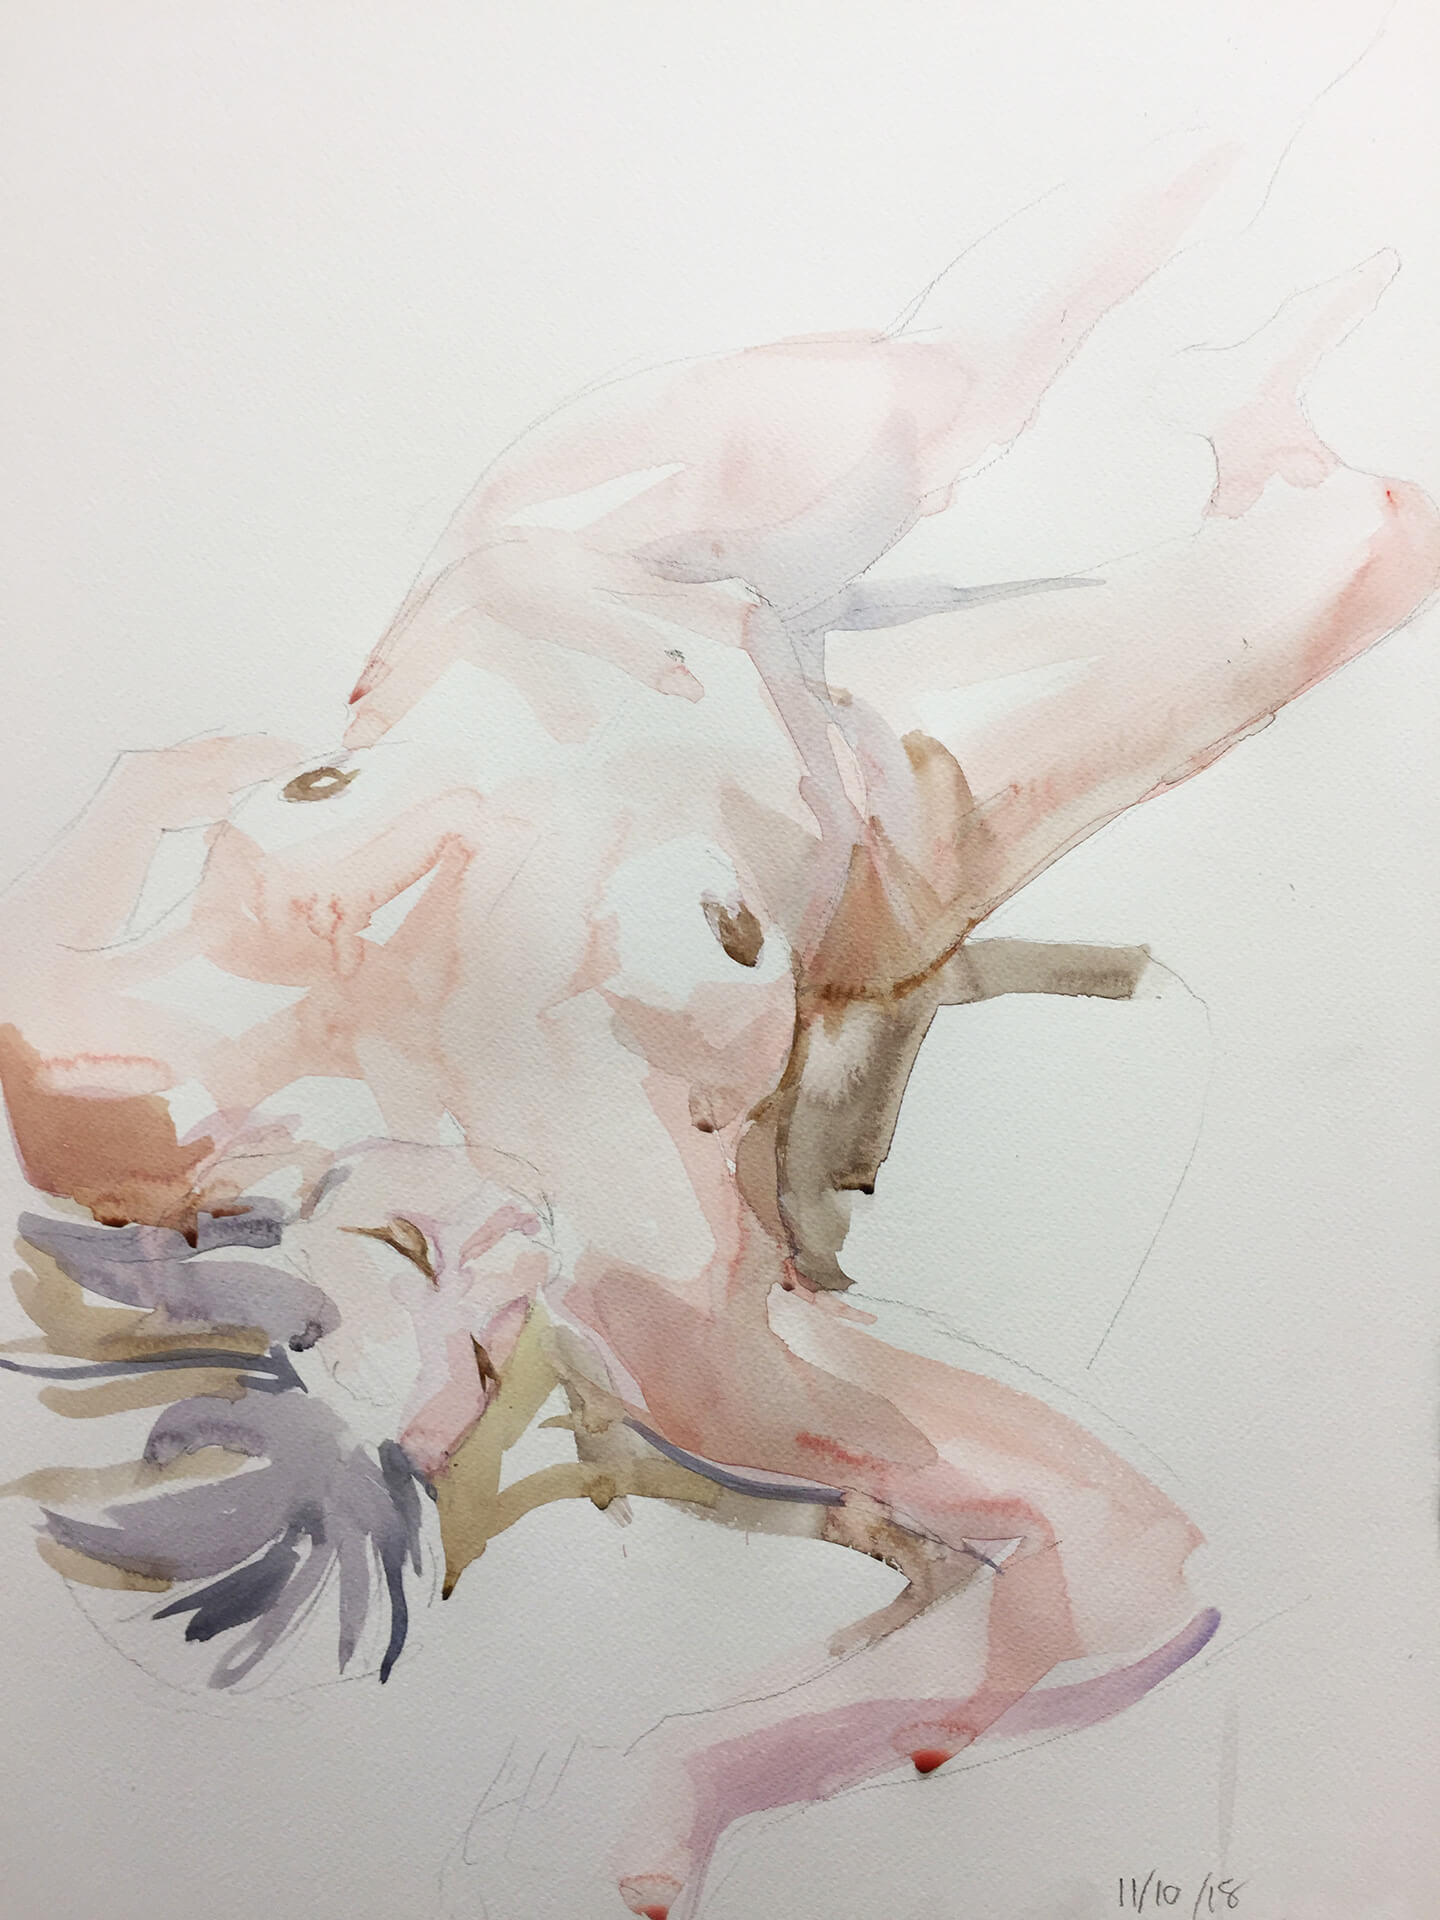 Life Drawing Session, 11/10/2018 